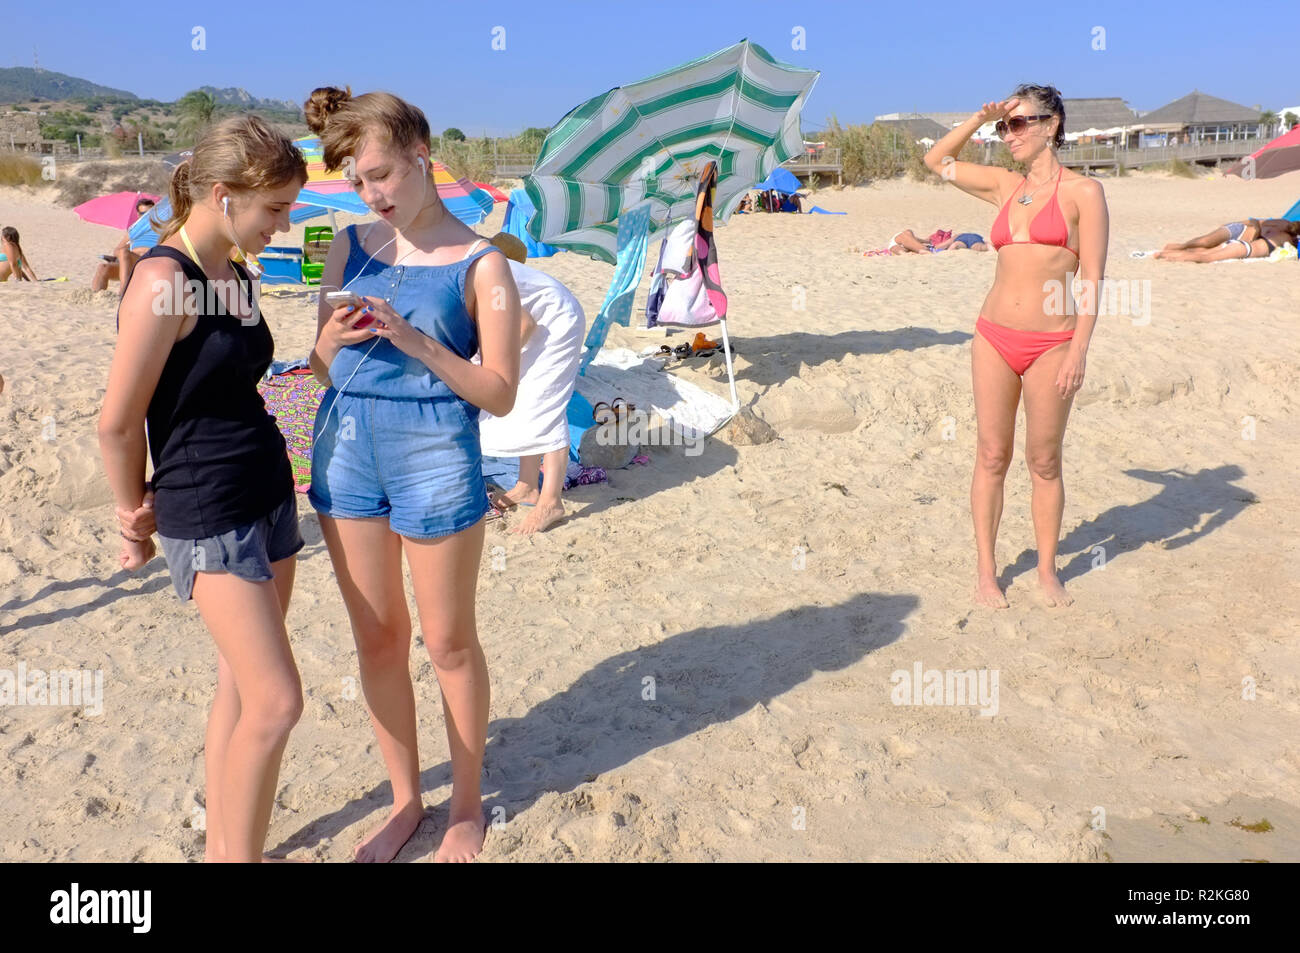 Teenage girls listening to a phone on a beach with their mother in the background. Stock Photo